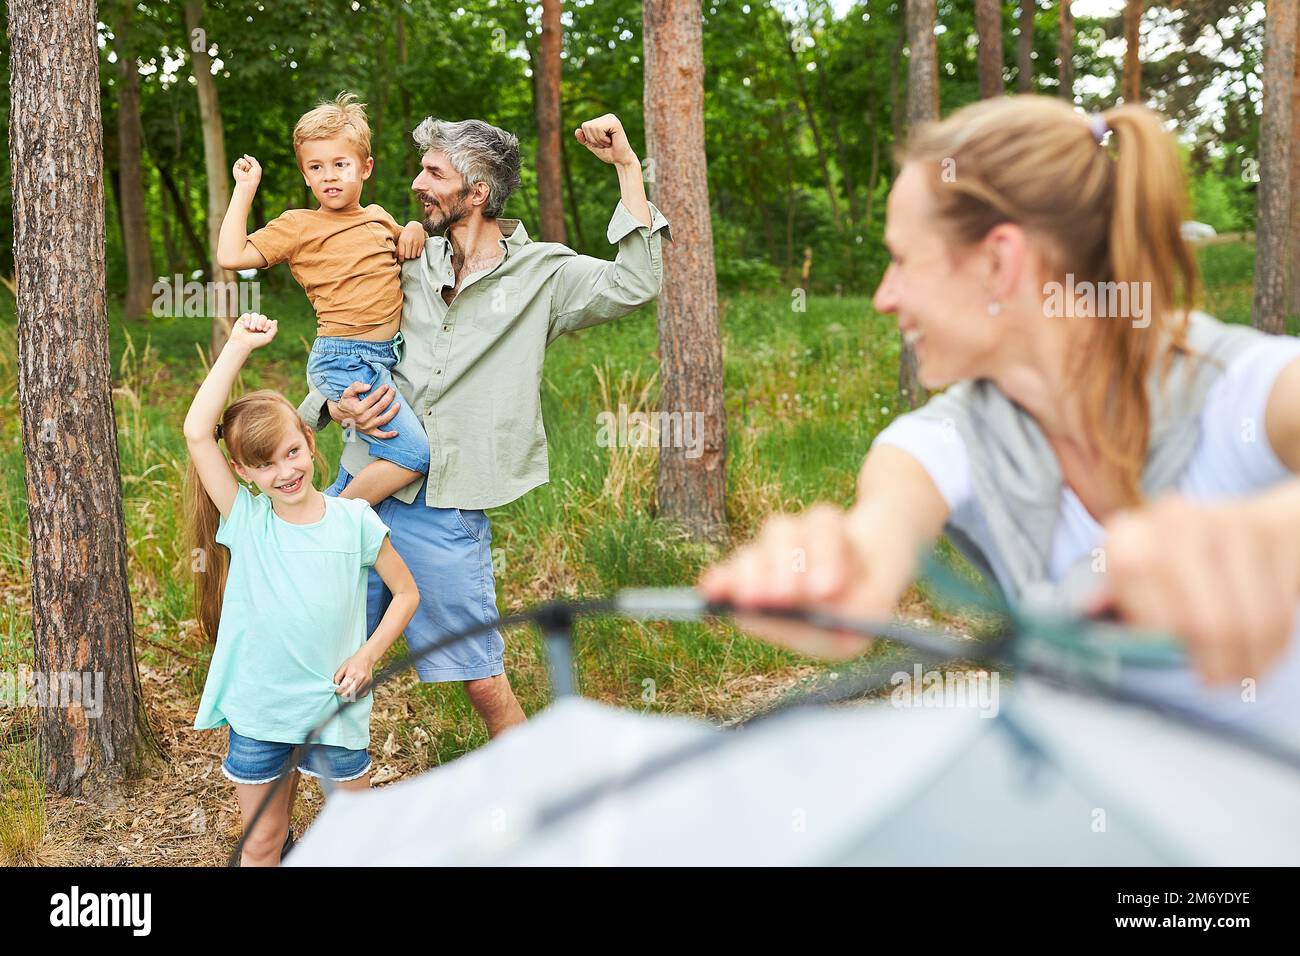 Woman setting up tent and looking at family cheering while camping together during summer vacation Stock Photo